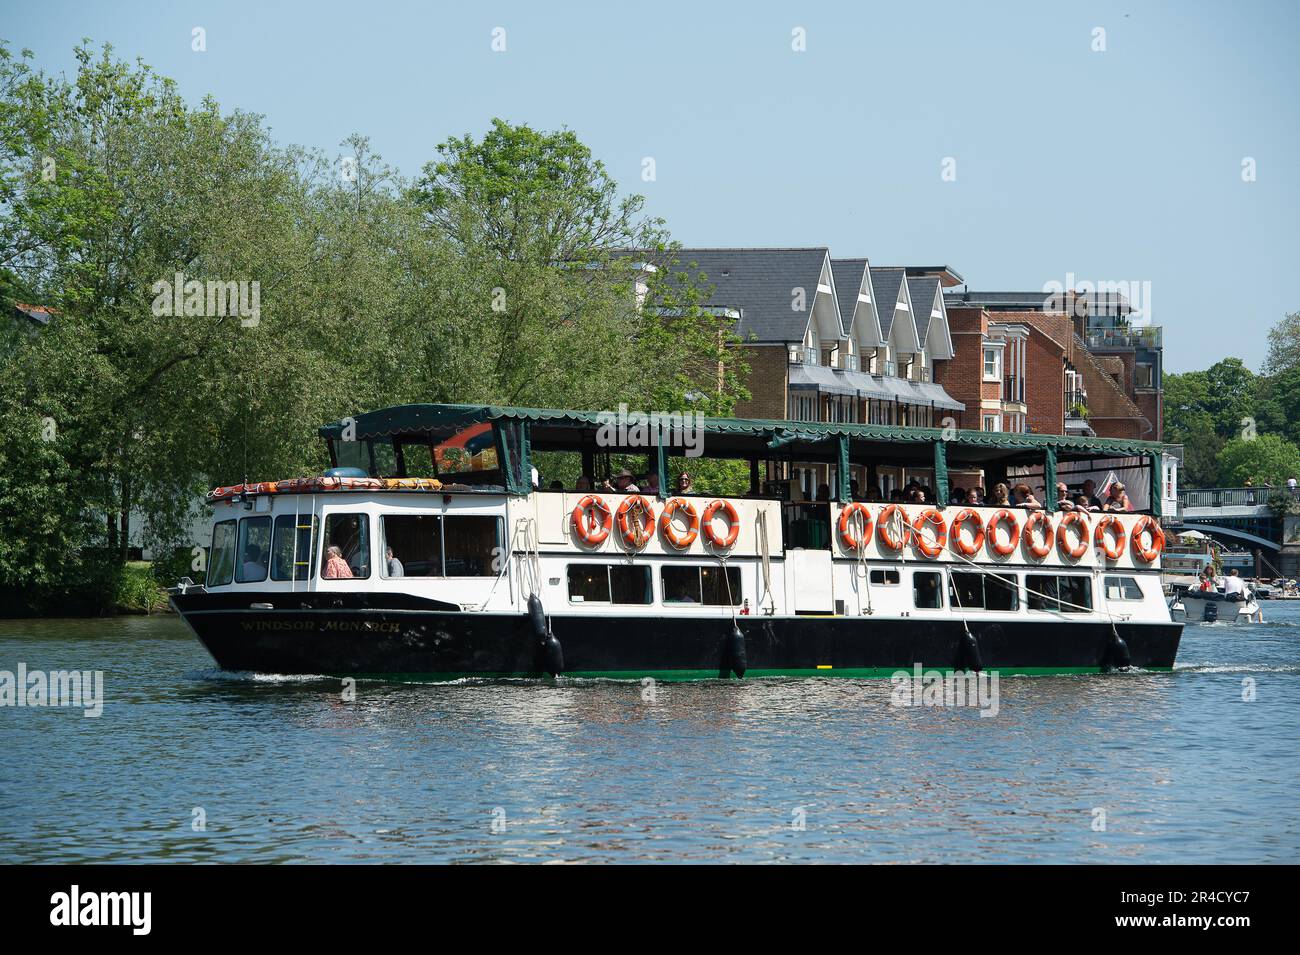 Windsor, Berkshire, UK. 27th May, 23. It was a beautiful warm and sunny day in Windsor Berkshire today as people flocked to the town for boat trips on the River Thames. Credit: Maureen McLean/Alamy Live News Stock Photo